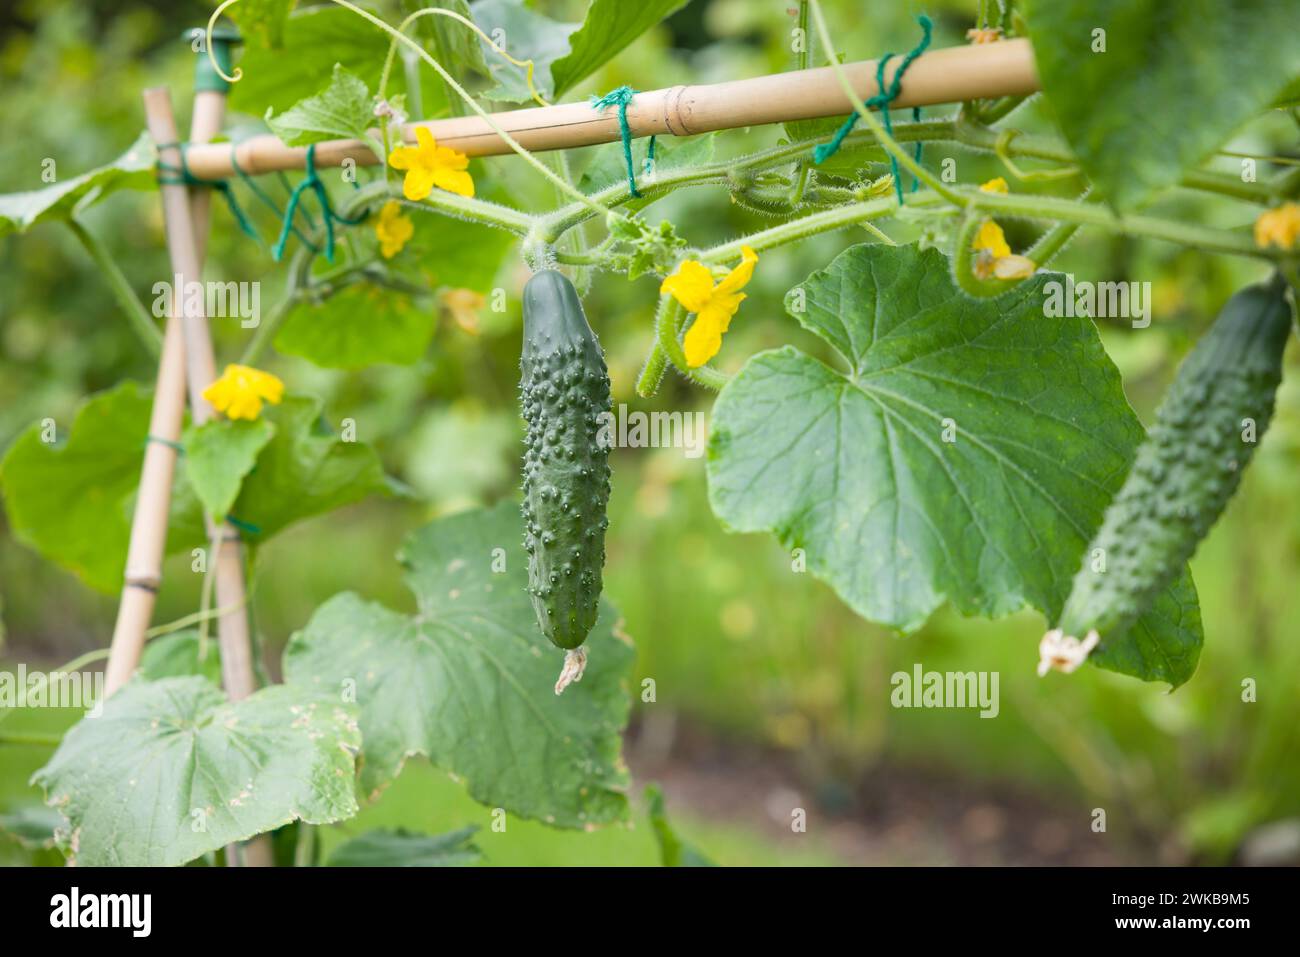 Cucumbers (Bedfordshire Prize ridged) hanging from a vine. Cucumber plant growing in an English garden in summer, UK Stock Photo